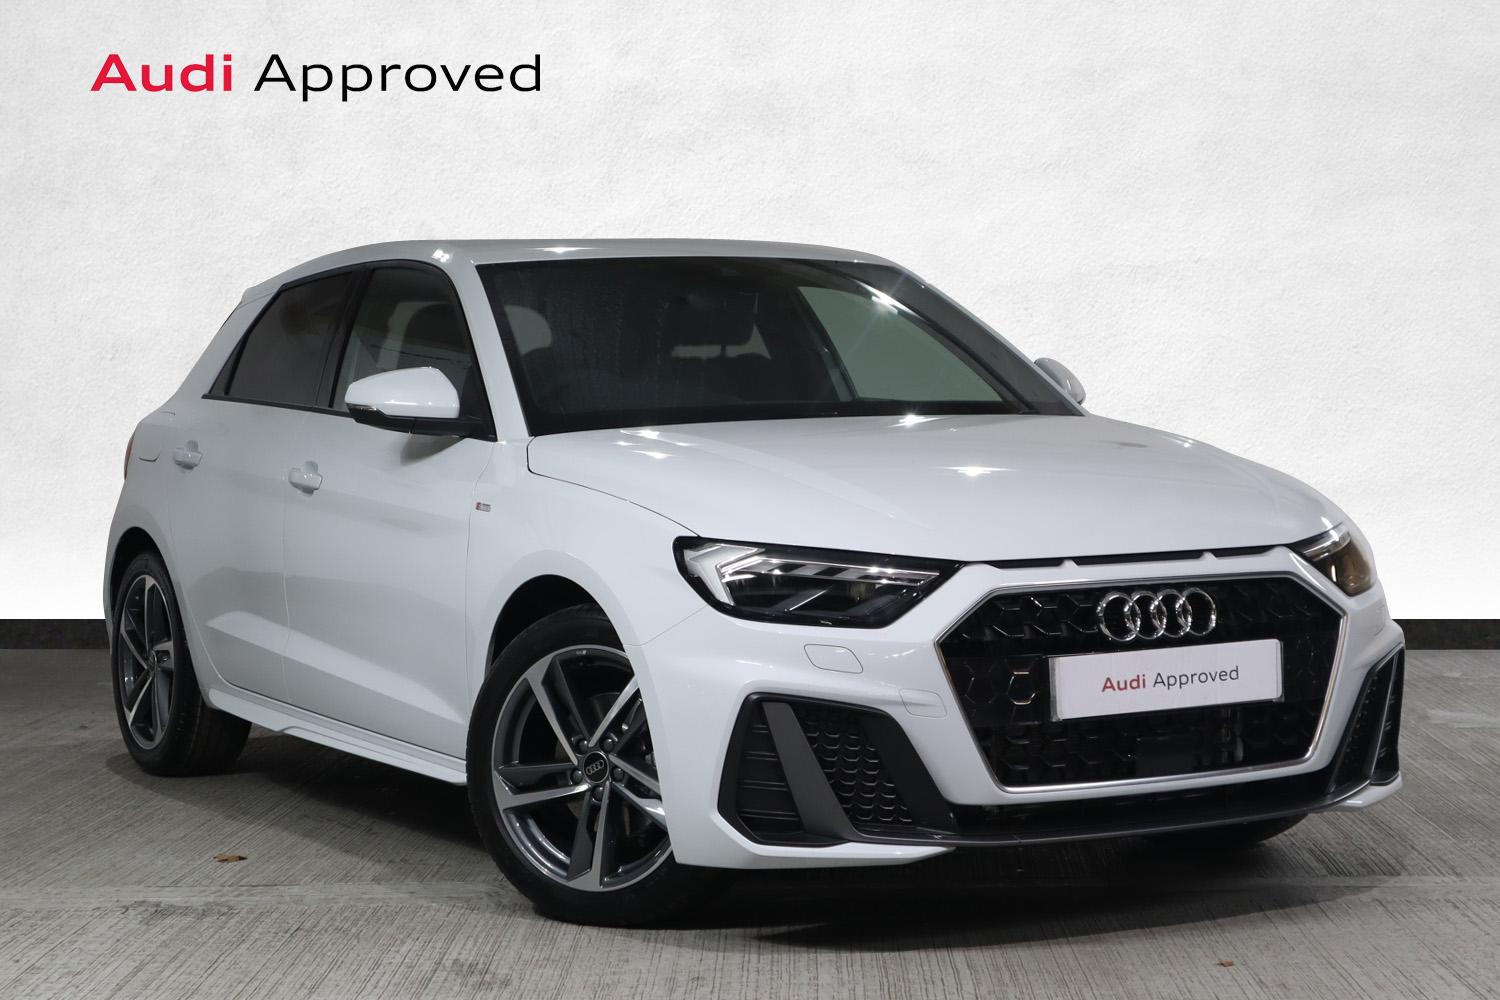 2023 Audi A1 - £30k for 110HP?!?! 1st Drive